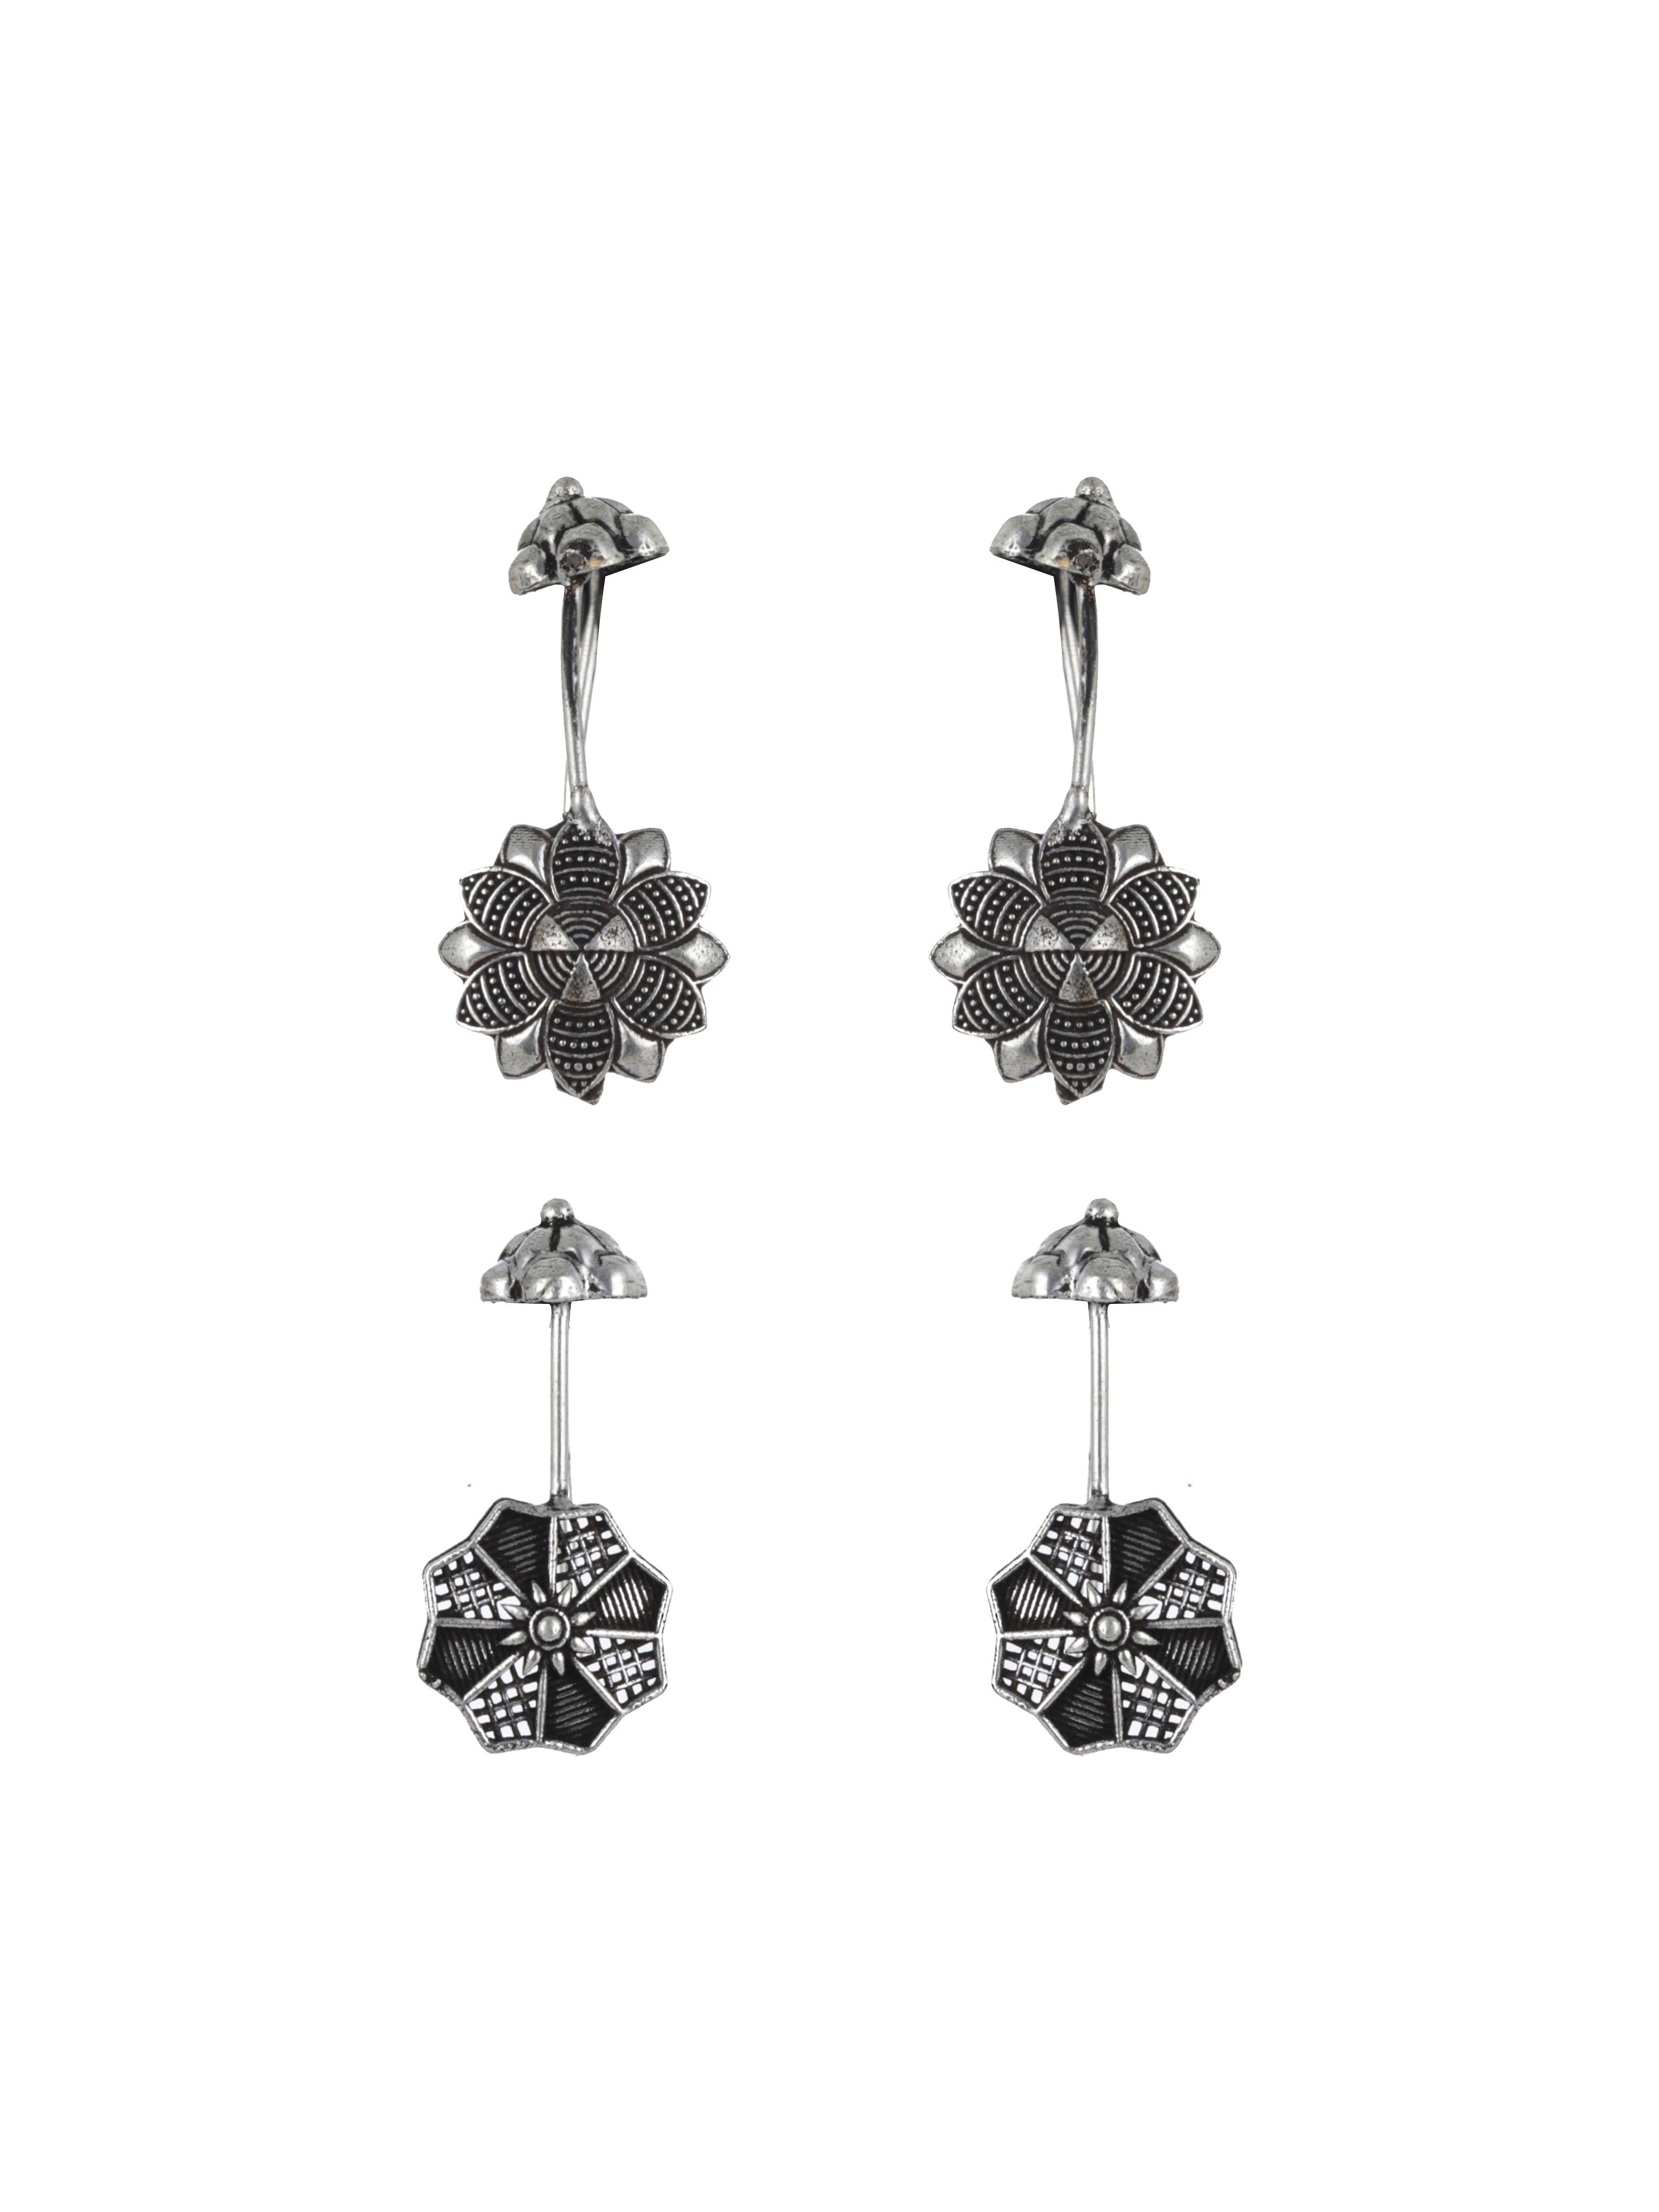 Set of 2 Silver-Toned Textured & Floral Ear Cuff Earrings